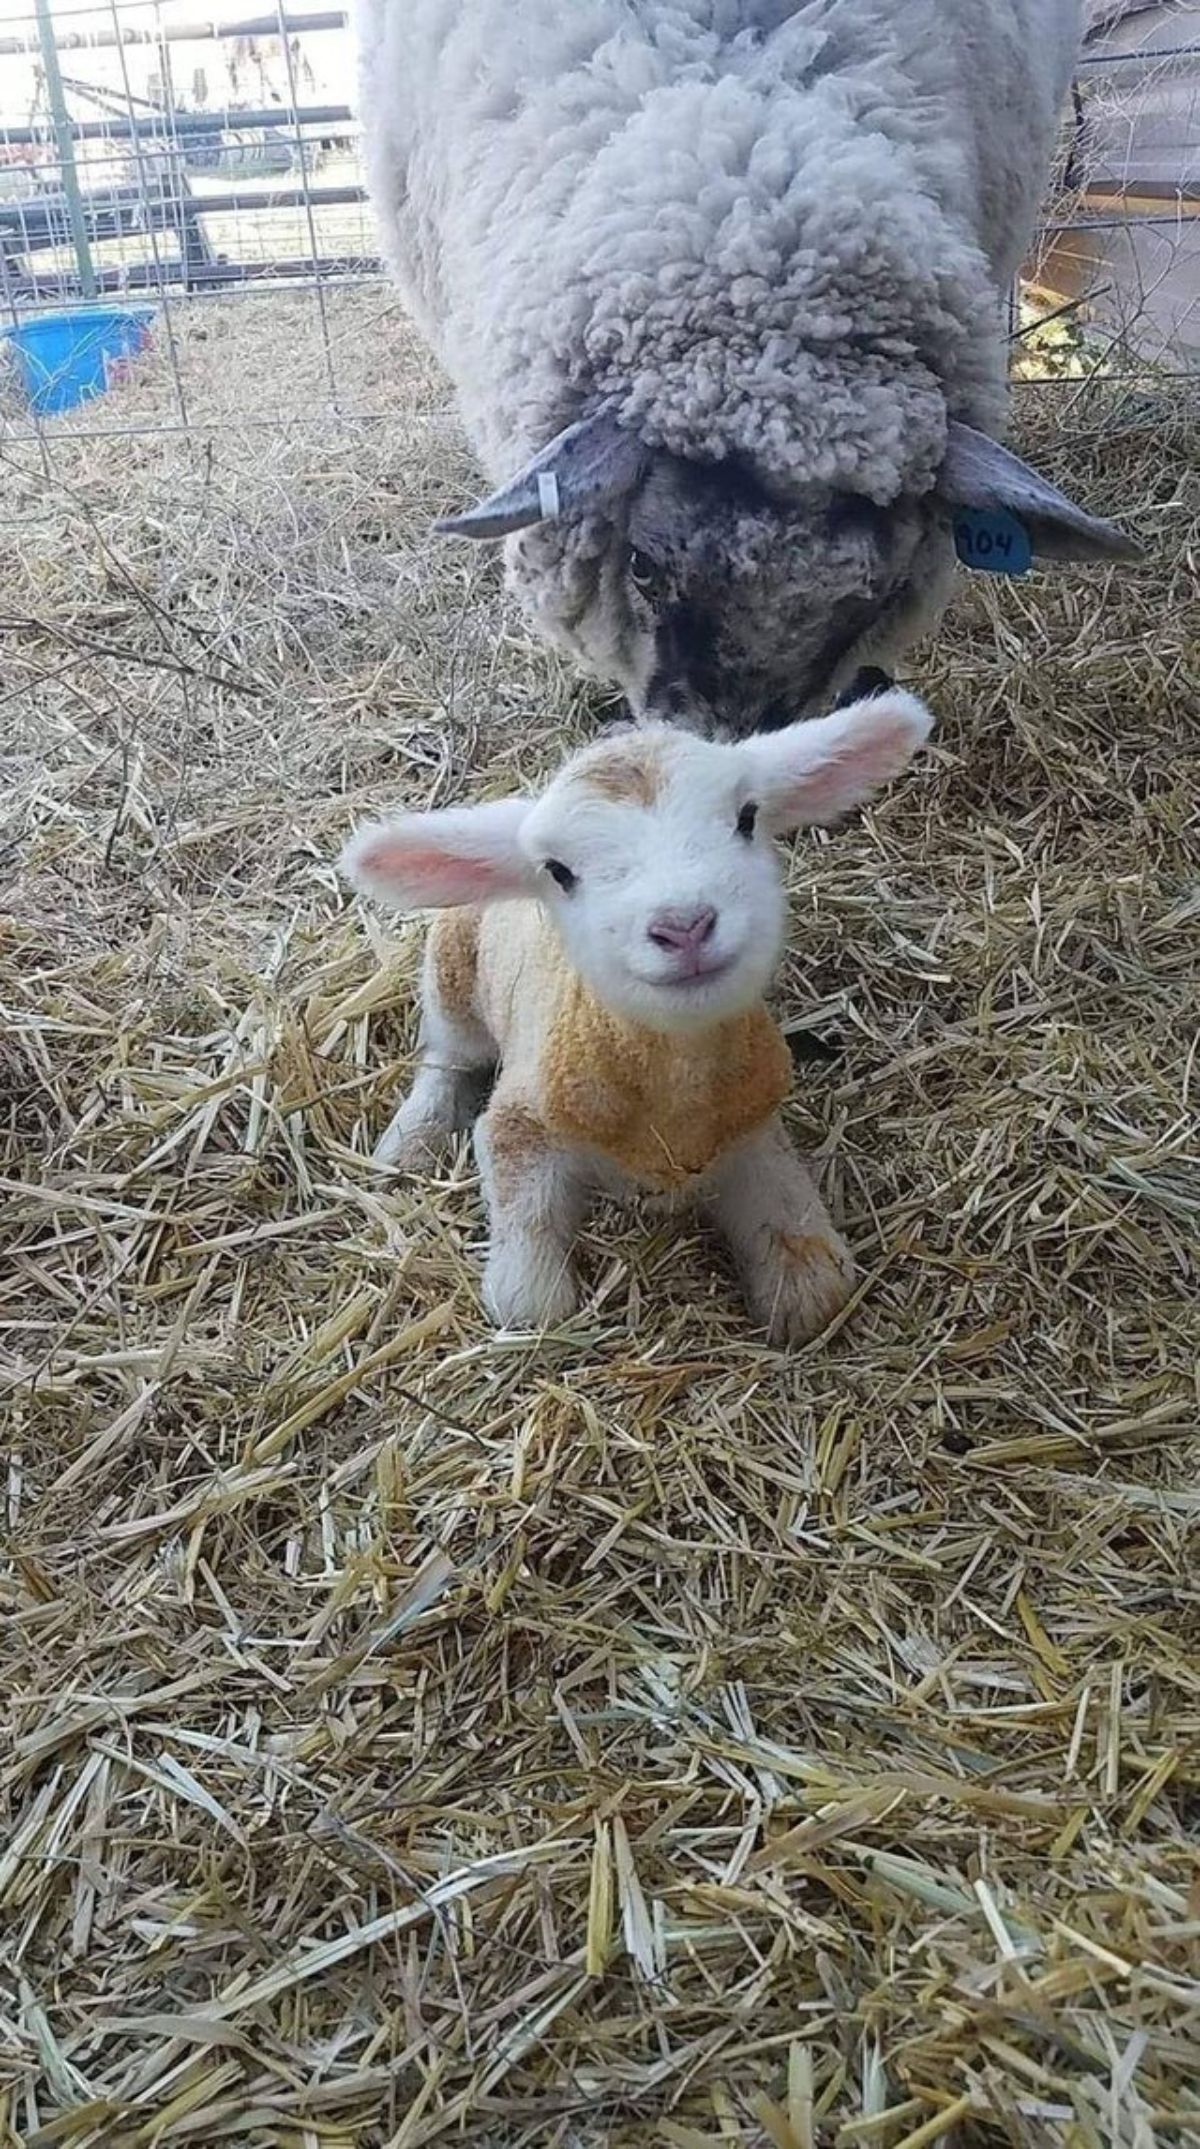 a newborn white lamb sitting on hay in front of the white mother sheep